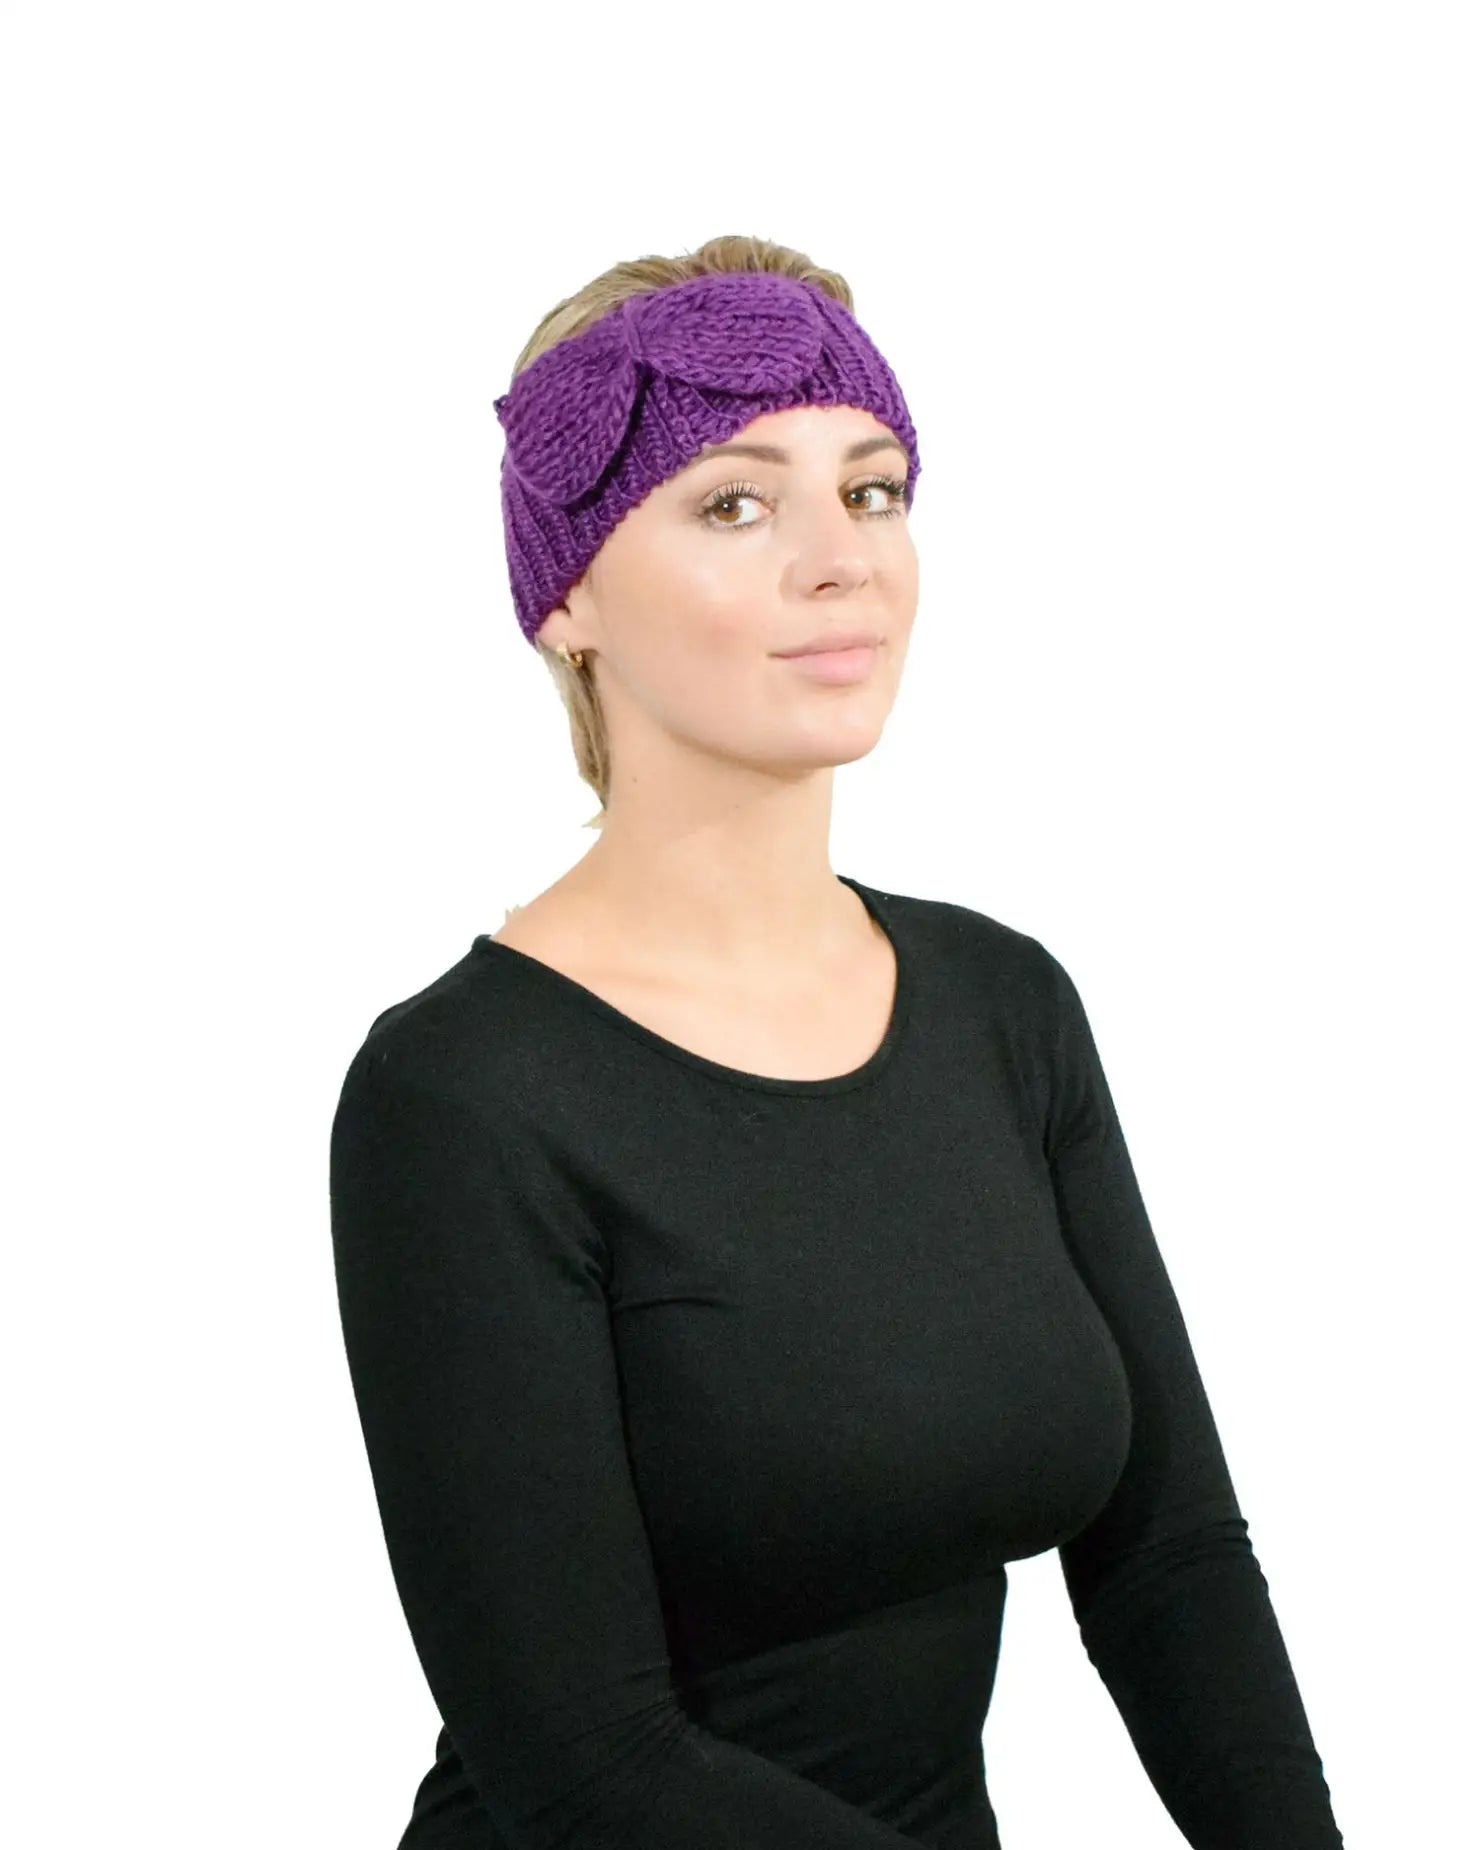 Woman wearing a purple headband with bow detail, perfect for Autumn & Winter.